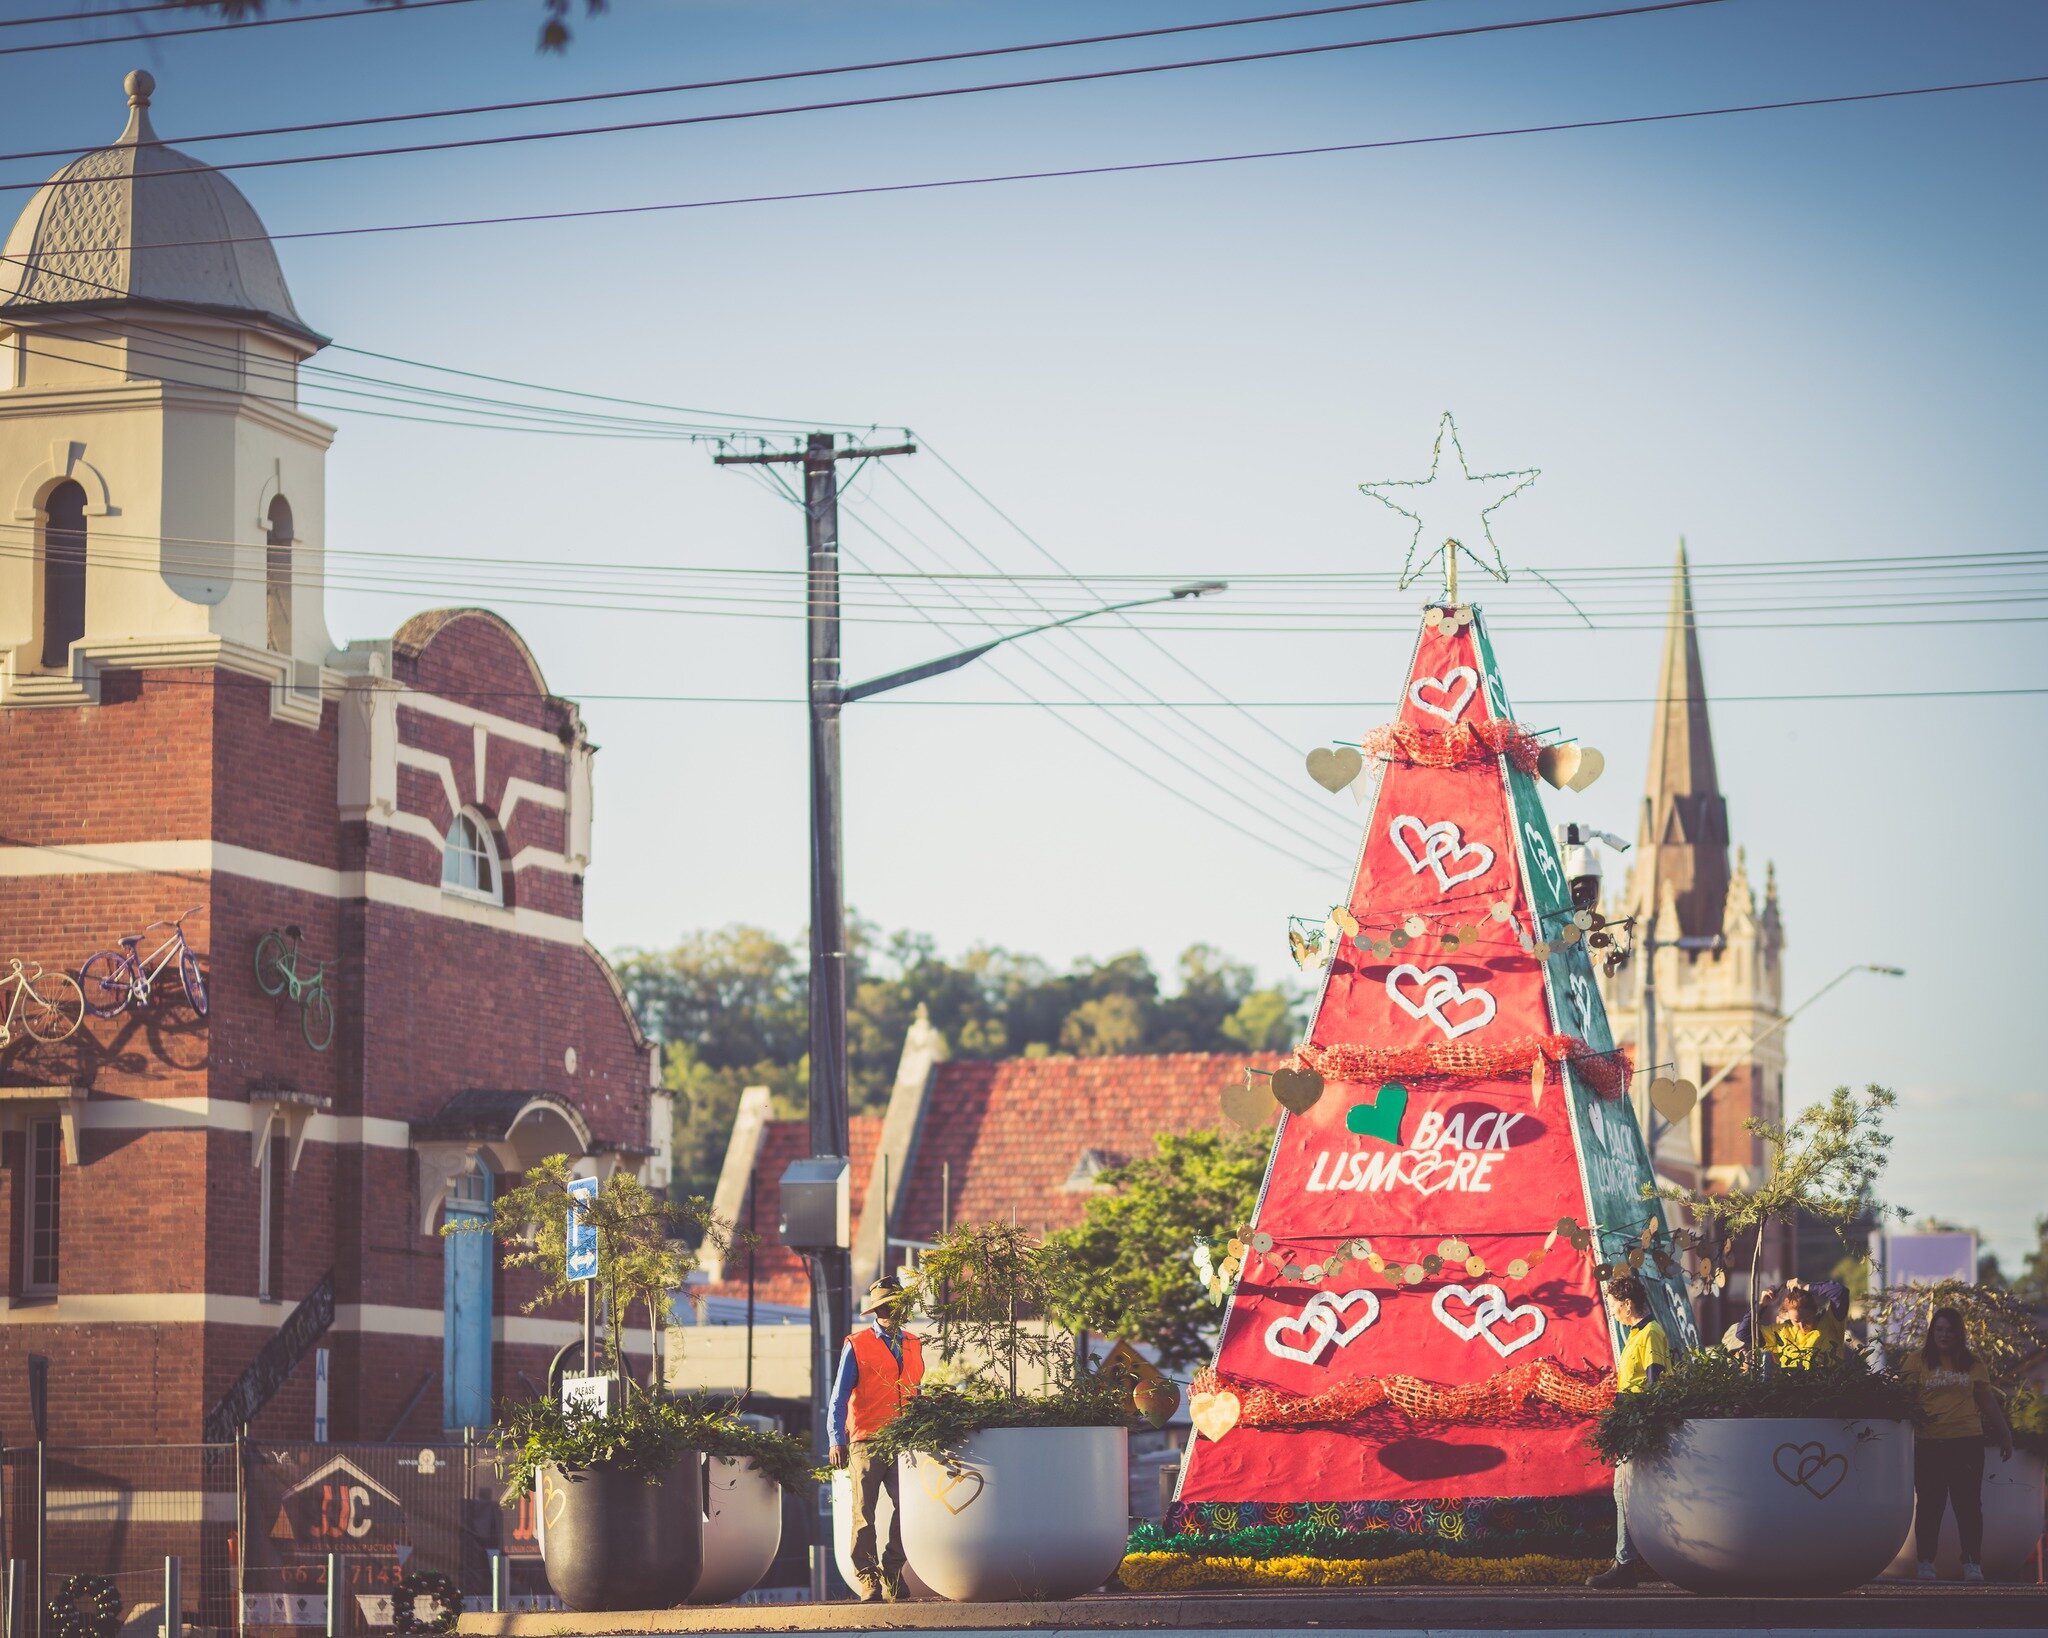 BACK LISMORE THIS CHRISTMAS

Lismore City Council's upcycled Christmas tree has been unveiled. This year's tree focuses on upcycling while encouraging people to #backlismore this Christmas.

This signals the beginning of a month-long festive extravag